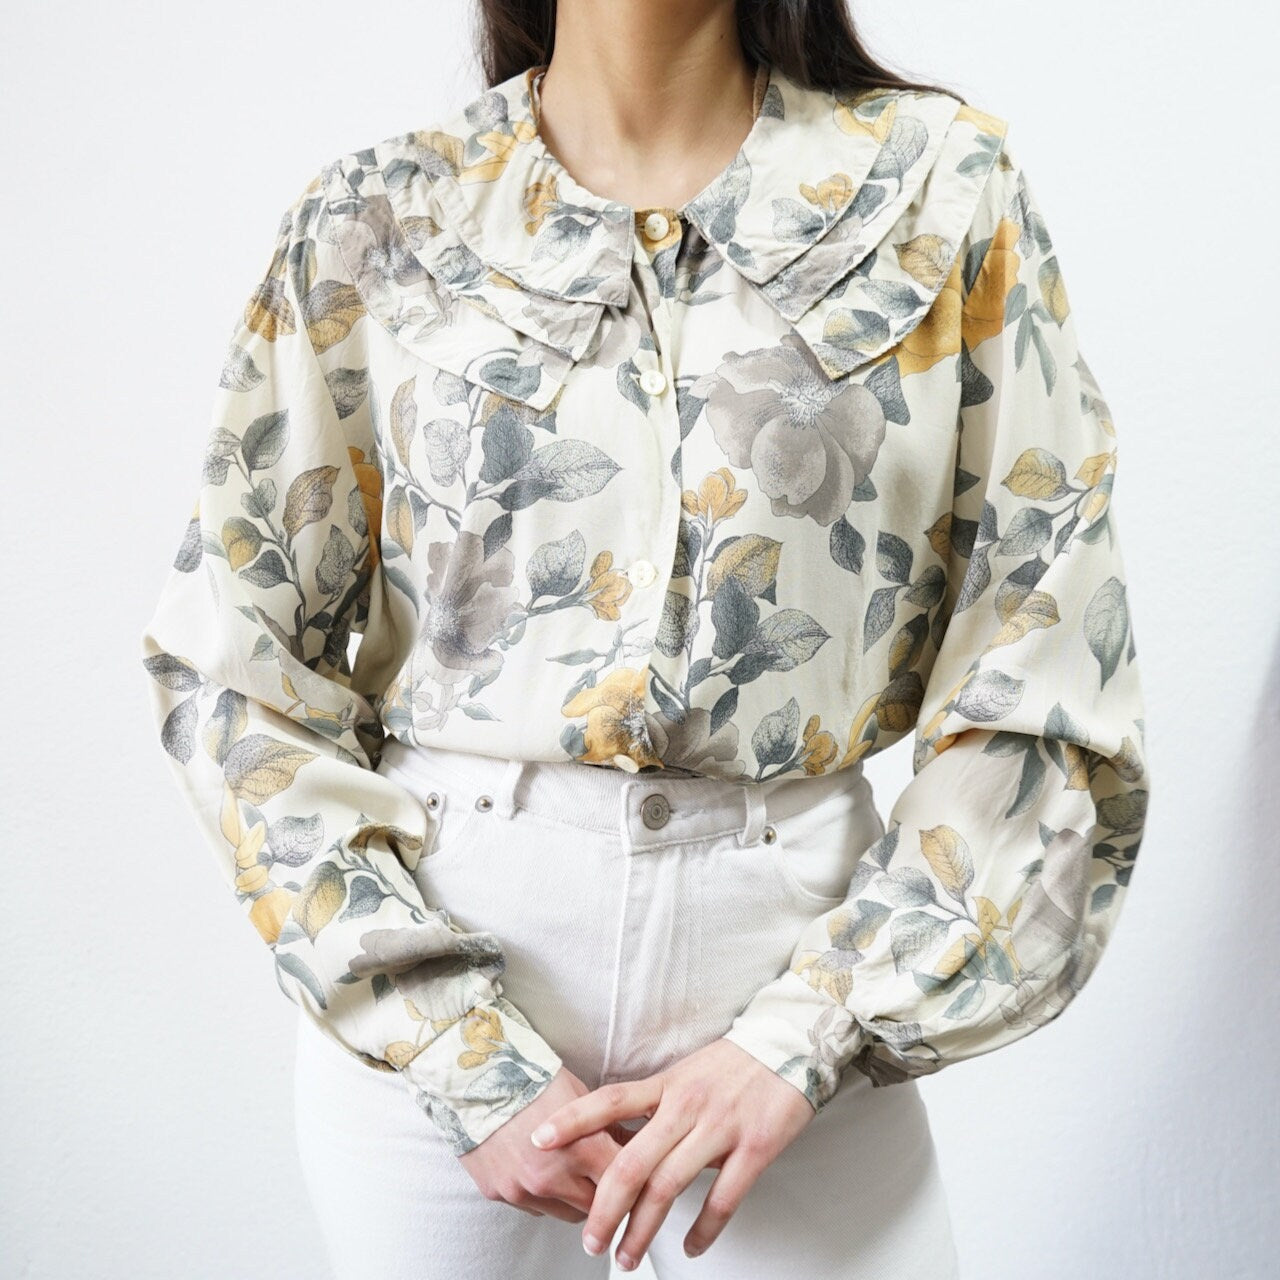 Vintage floral blouse size M long sleeved shirt women button up blouse collared blouse